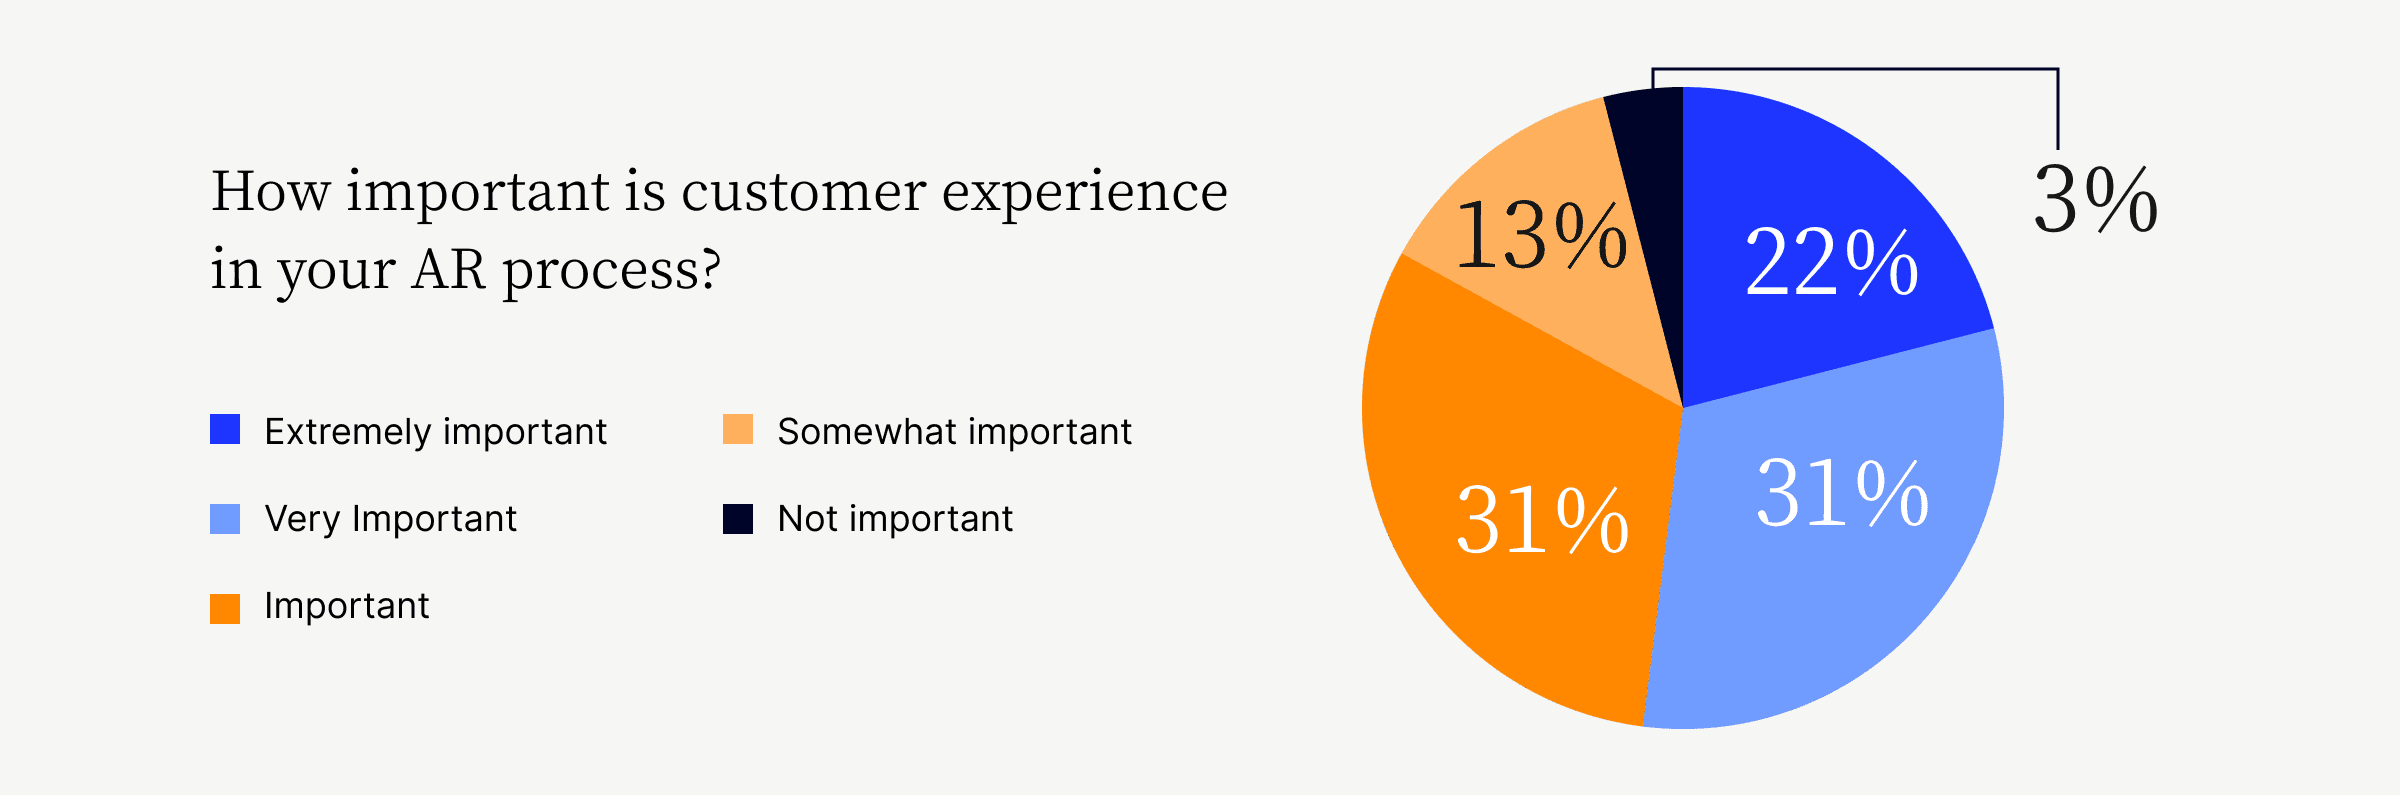 Collections calls damage customer's payment experiences